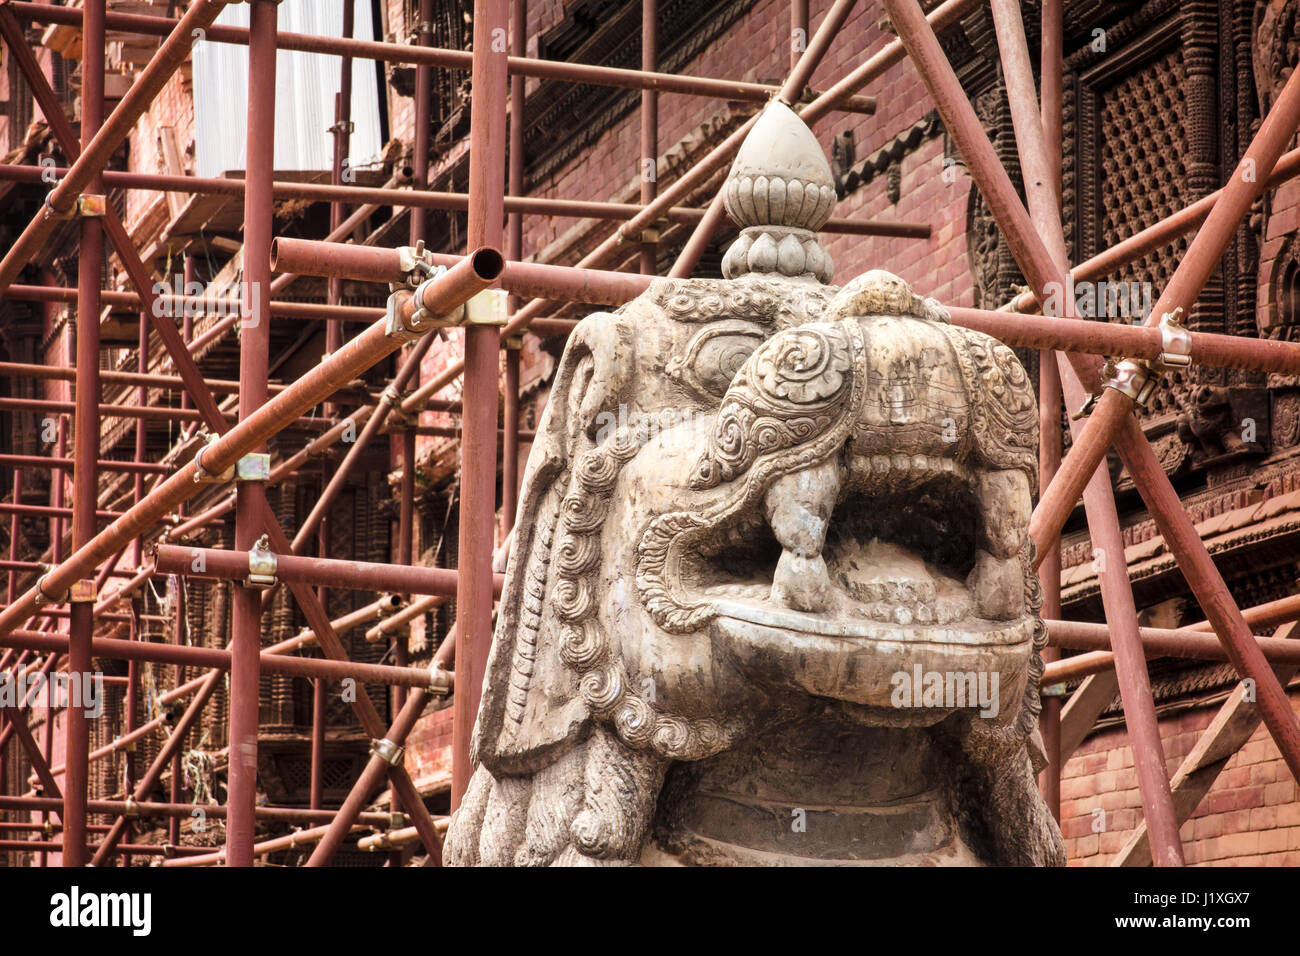 Scaffolding set up to support one of the many structures damaged in the 2015 earthquake surrounds an ornately carved statue. Durbar Square, Kathmandu. Stock Photo